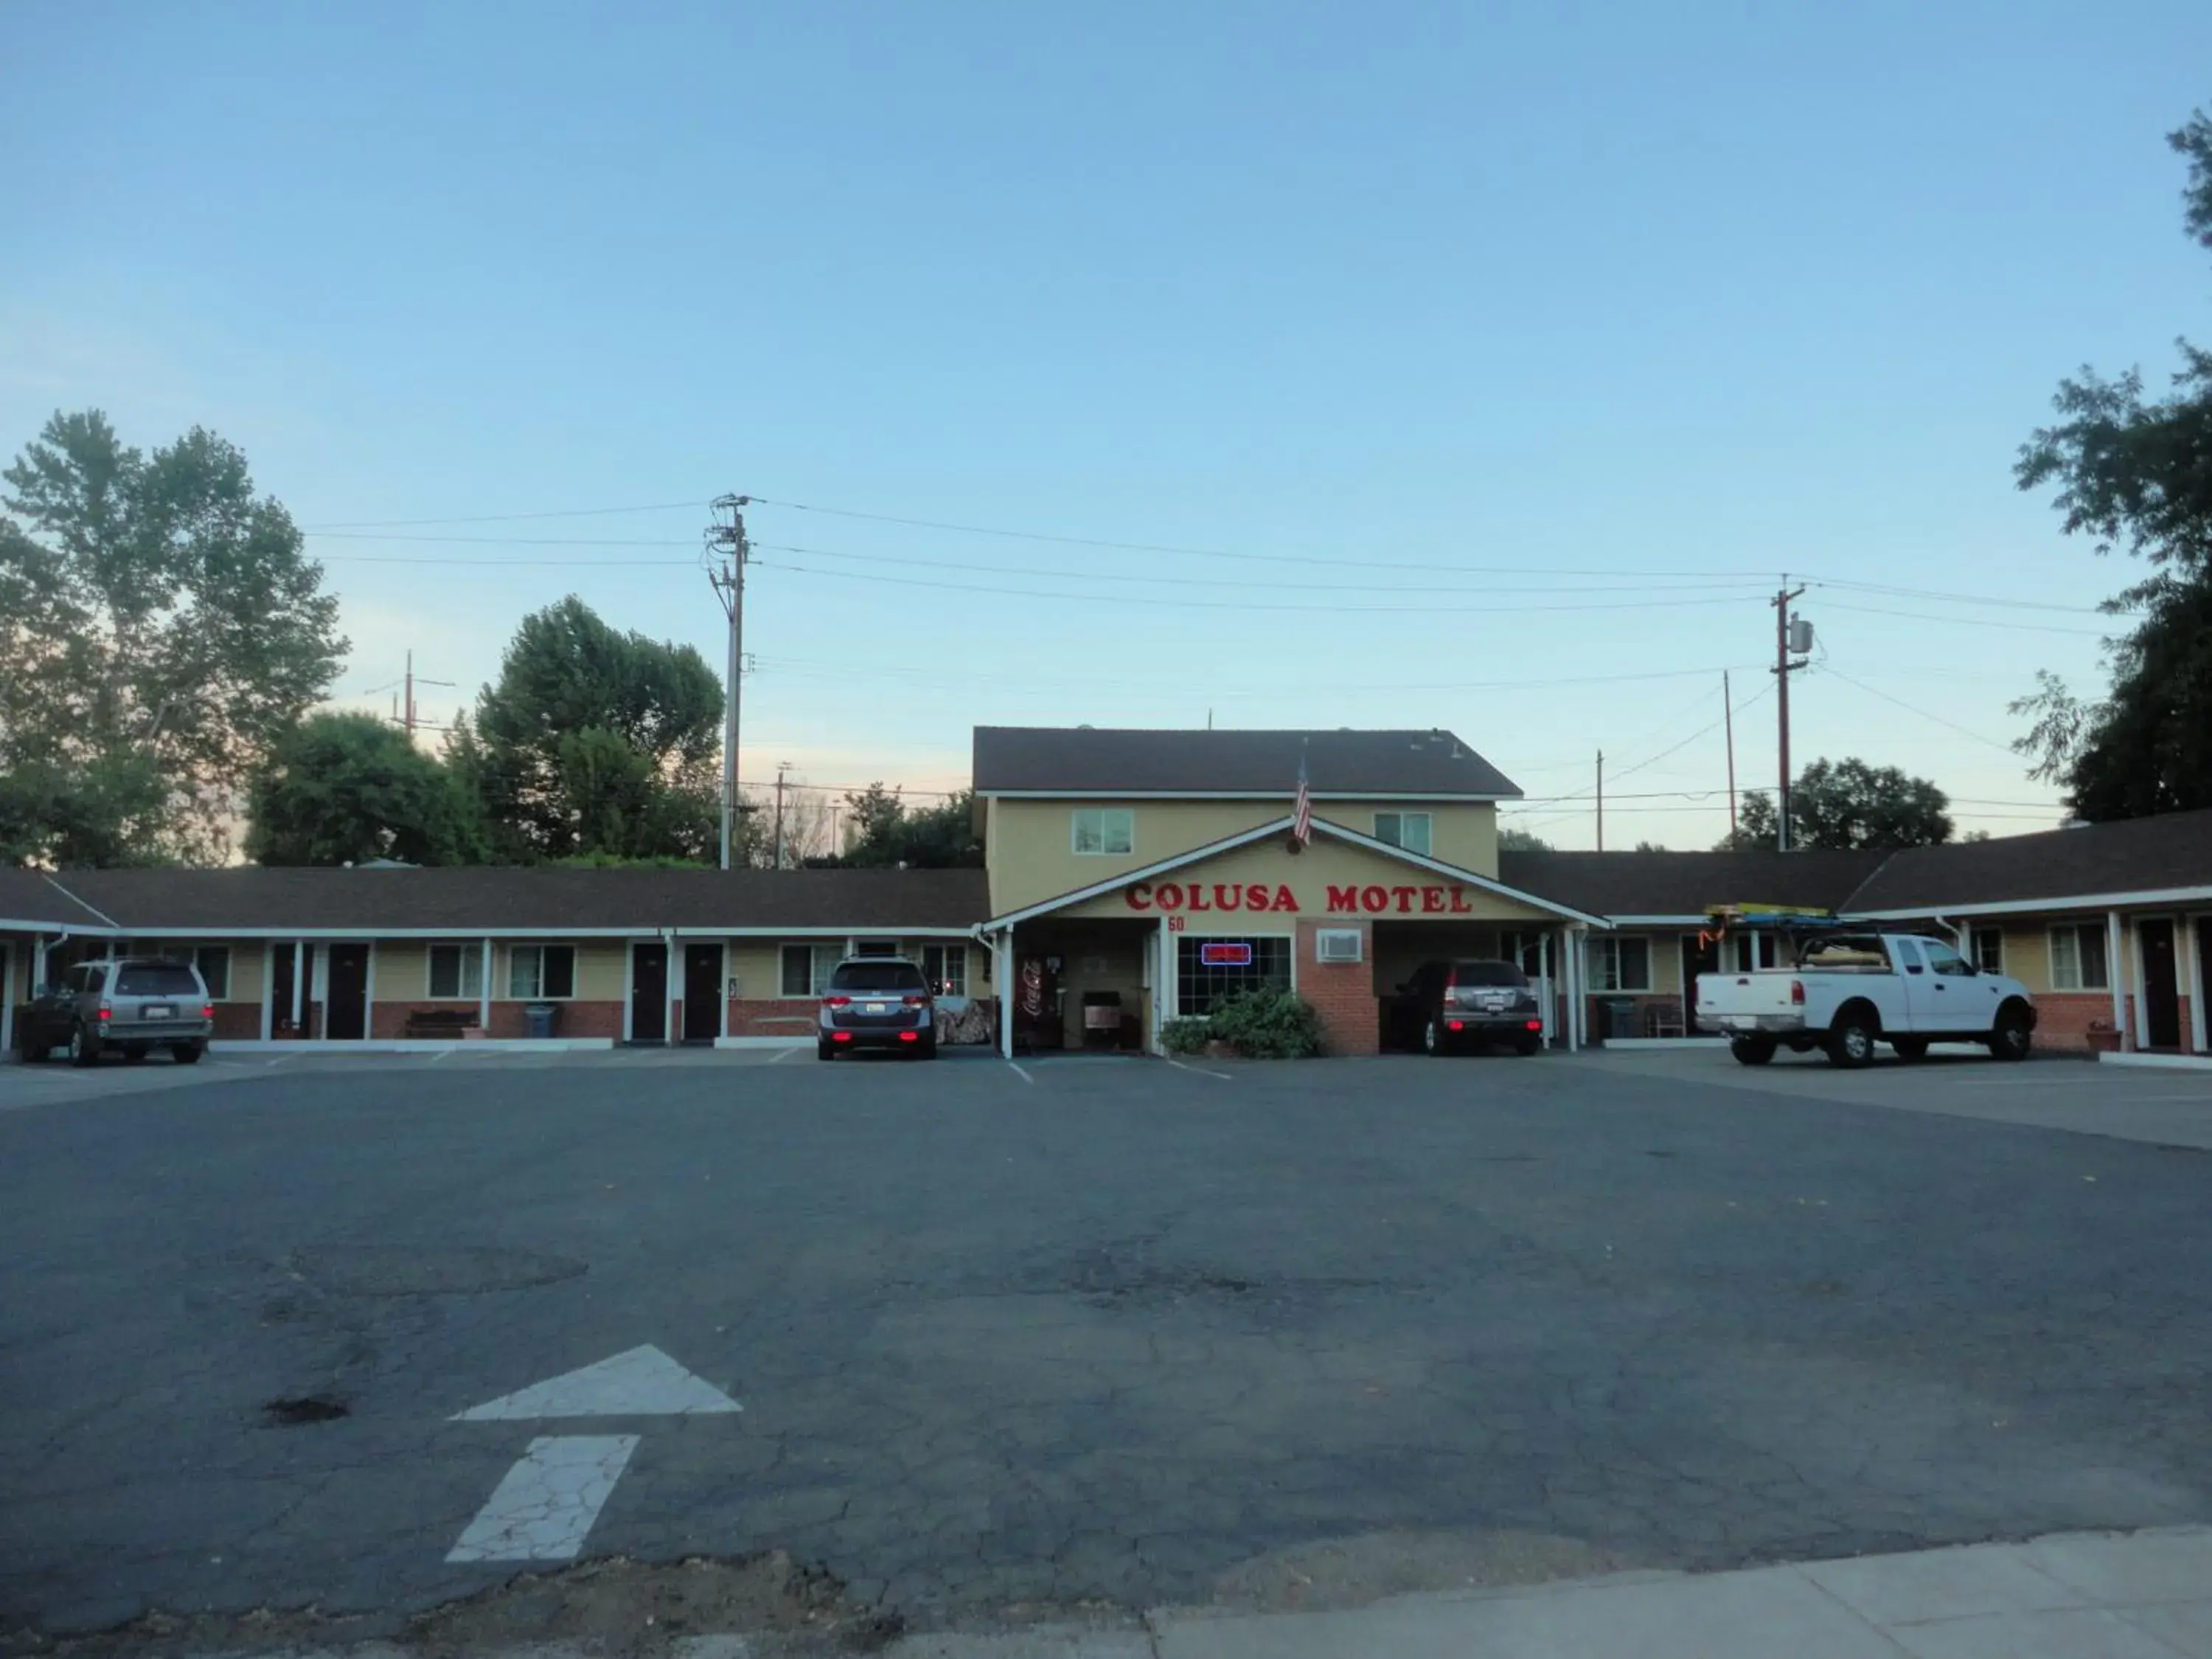 Property Building in Colusa Motel